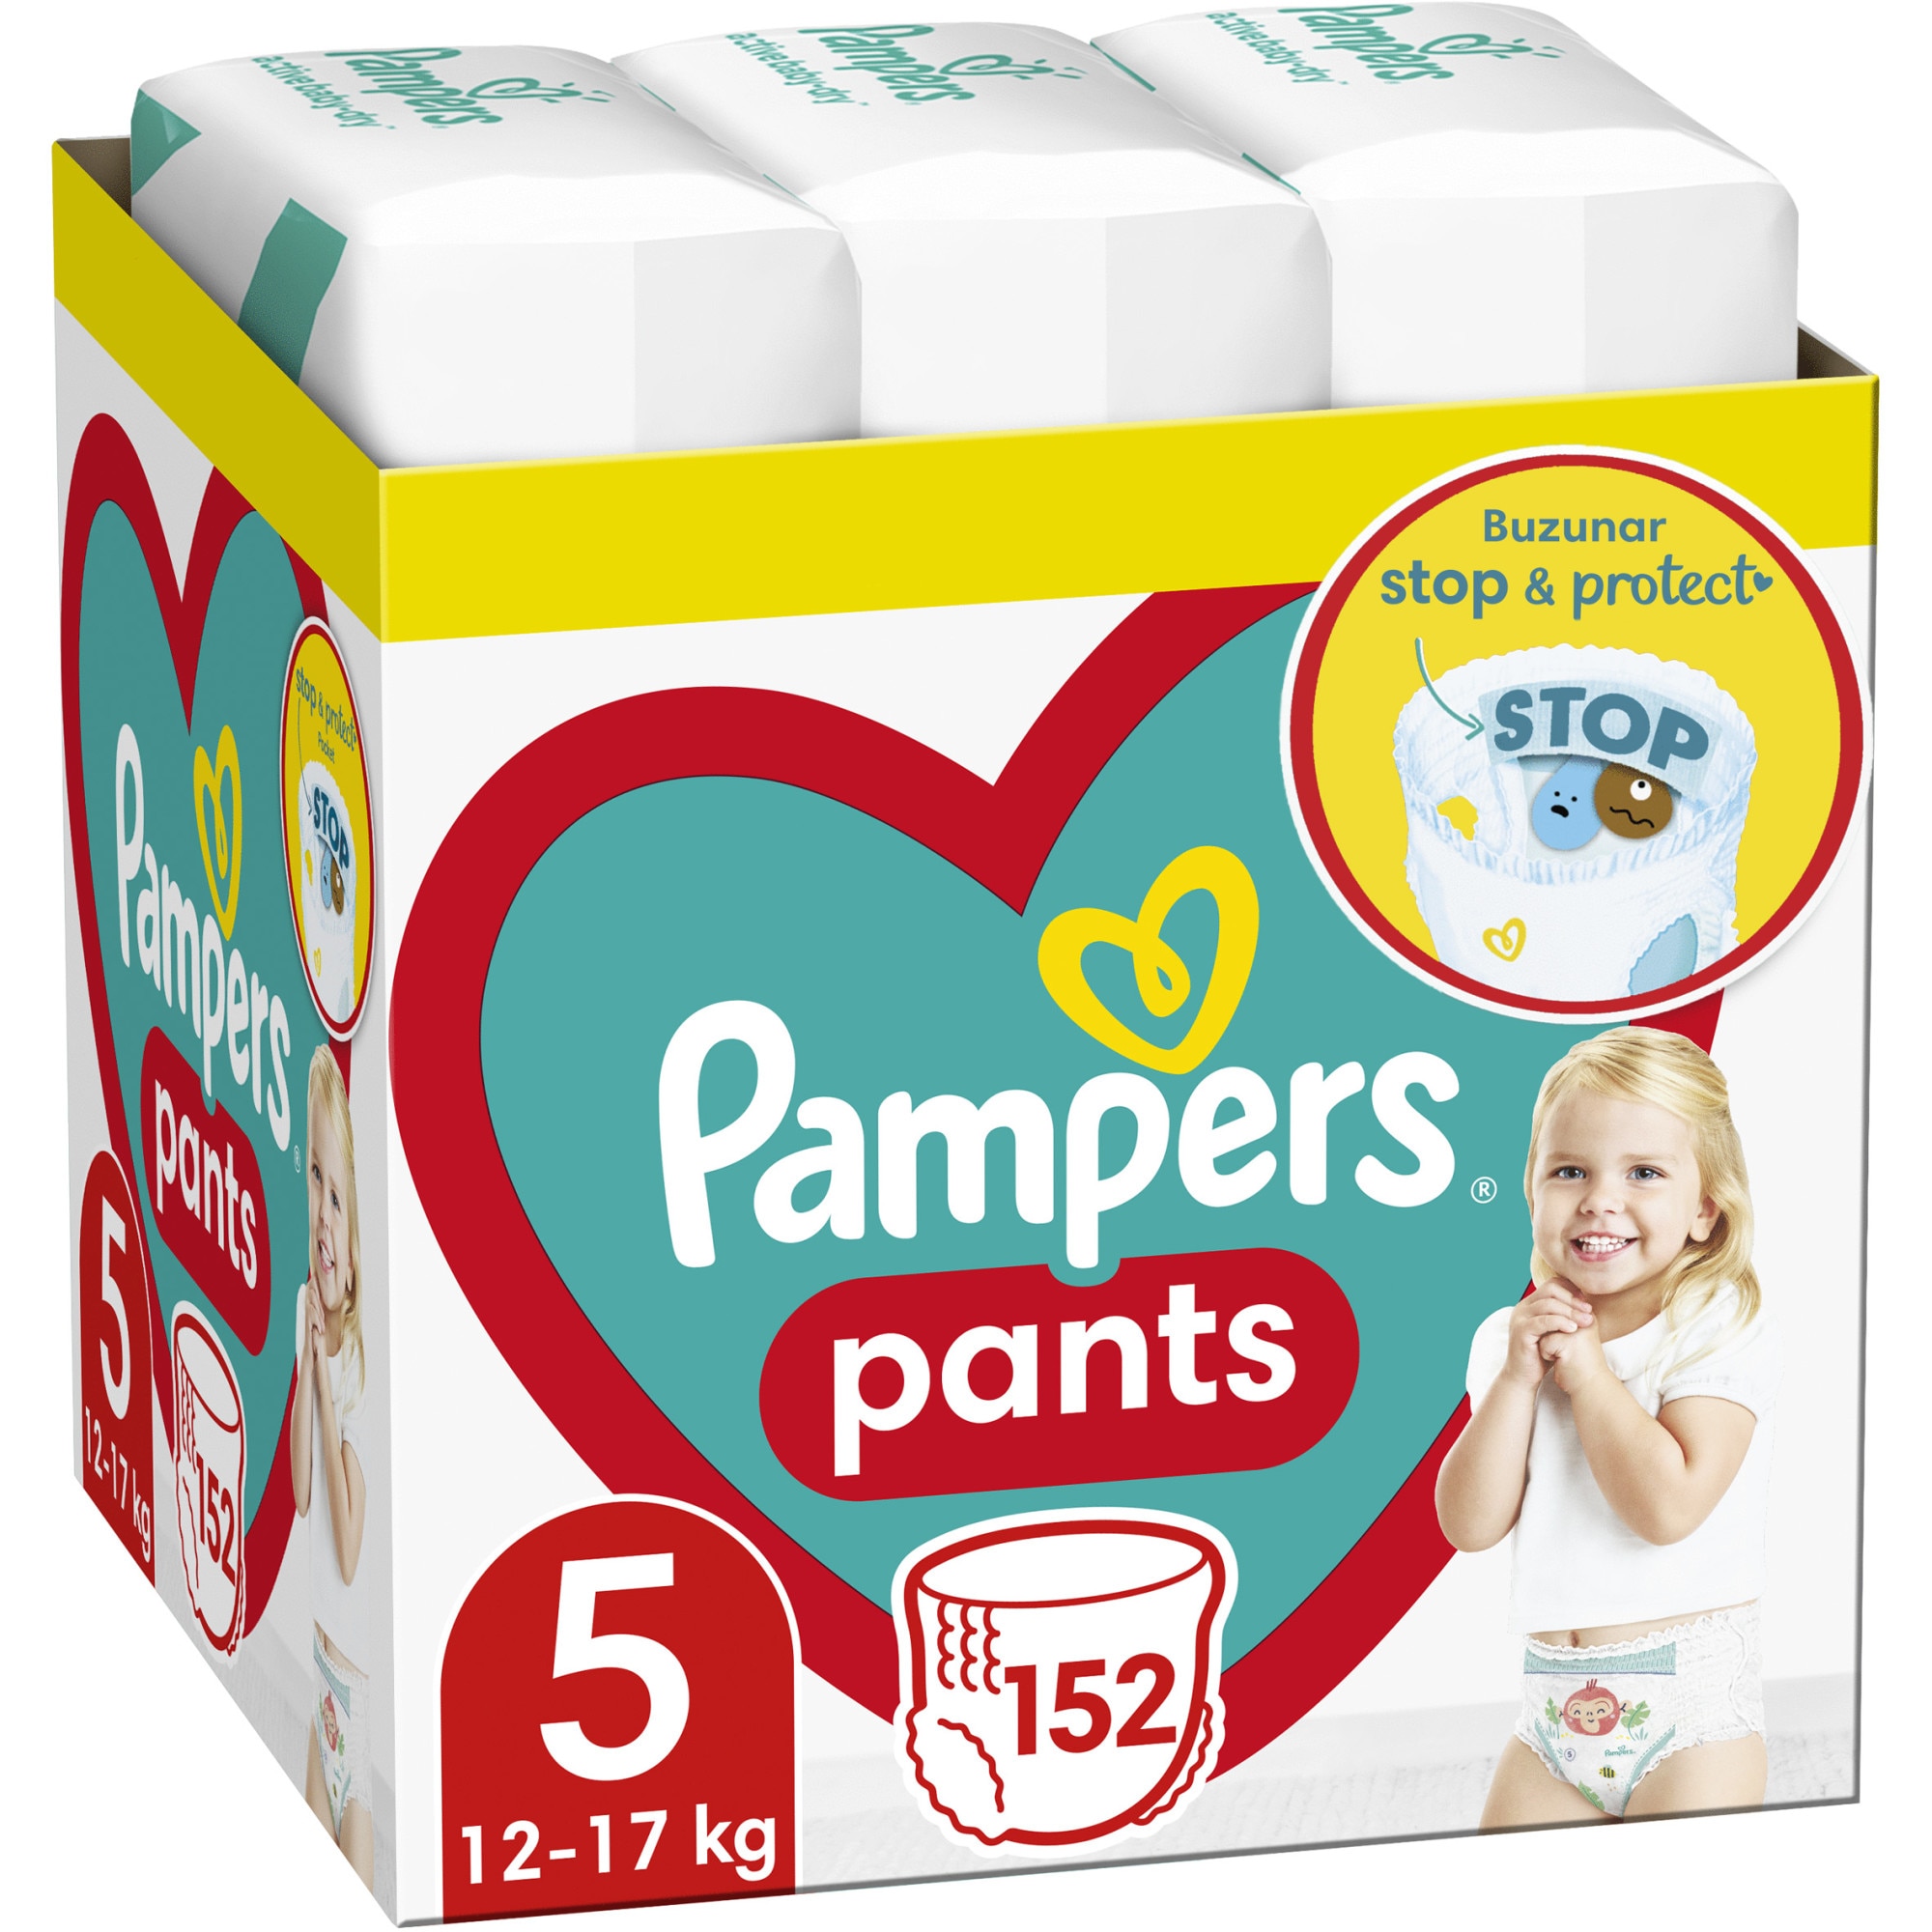 Exceed Prevail mimic Scutece-chilotel Pampers Pants XXL Box Marimea 5, 12-17 kg, 152 buc - eMAG .ro